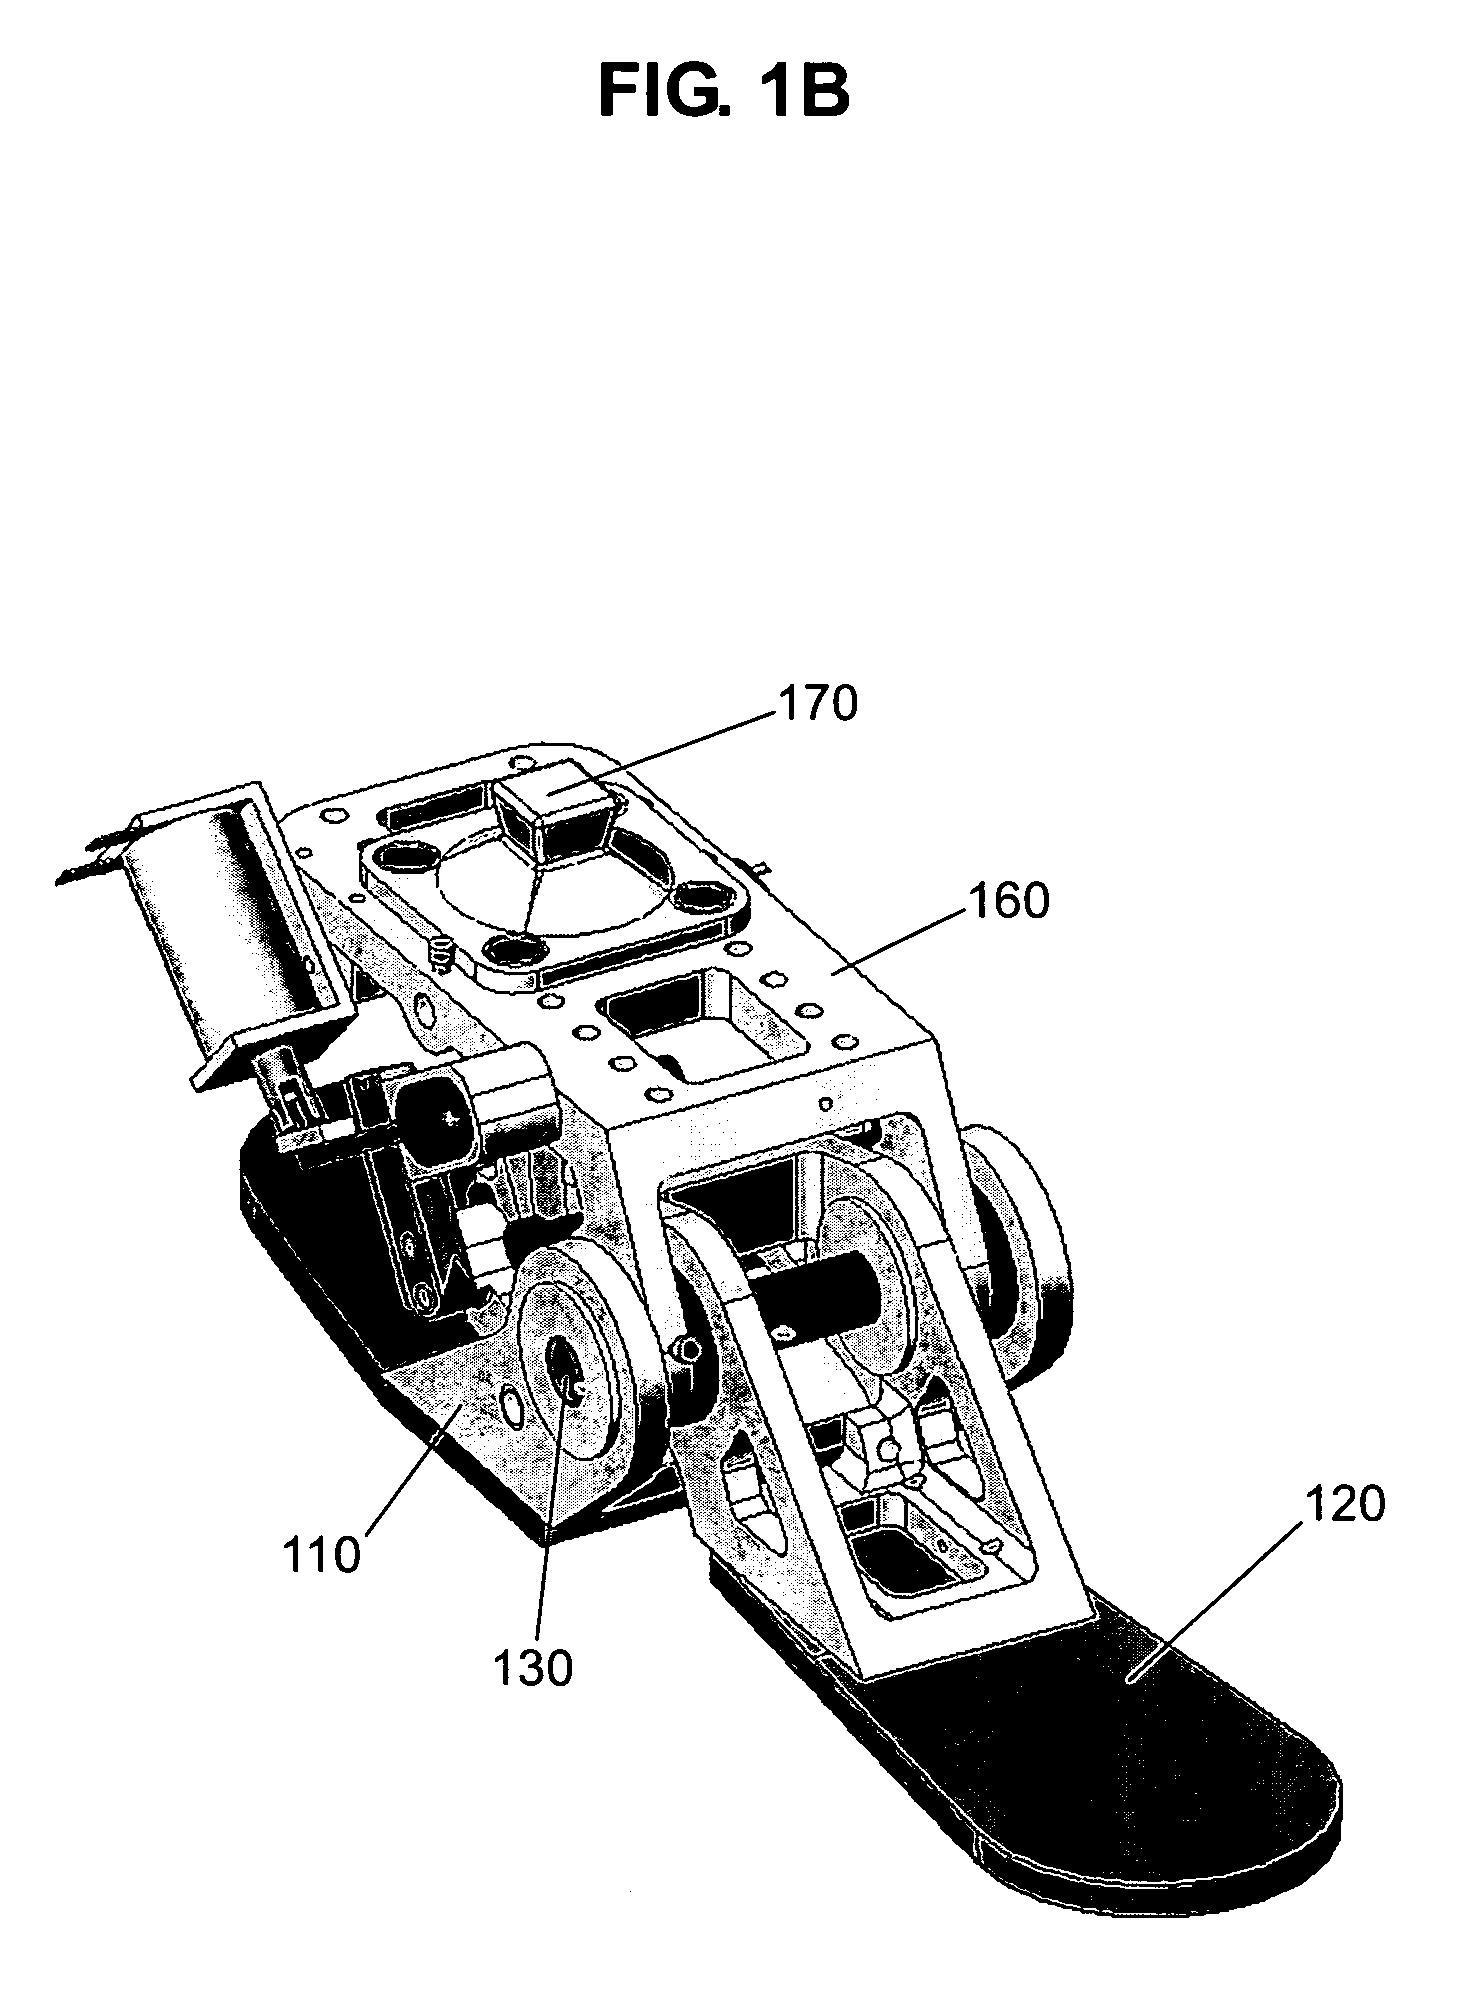 Foot prosthetic and methods of use